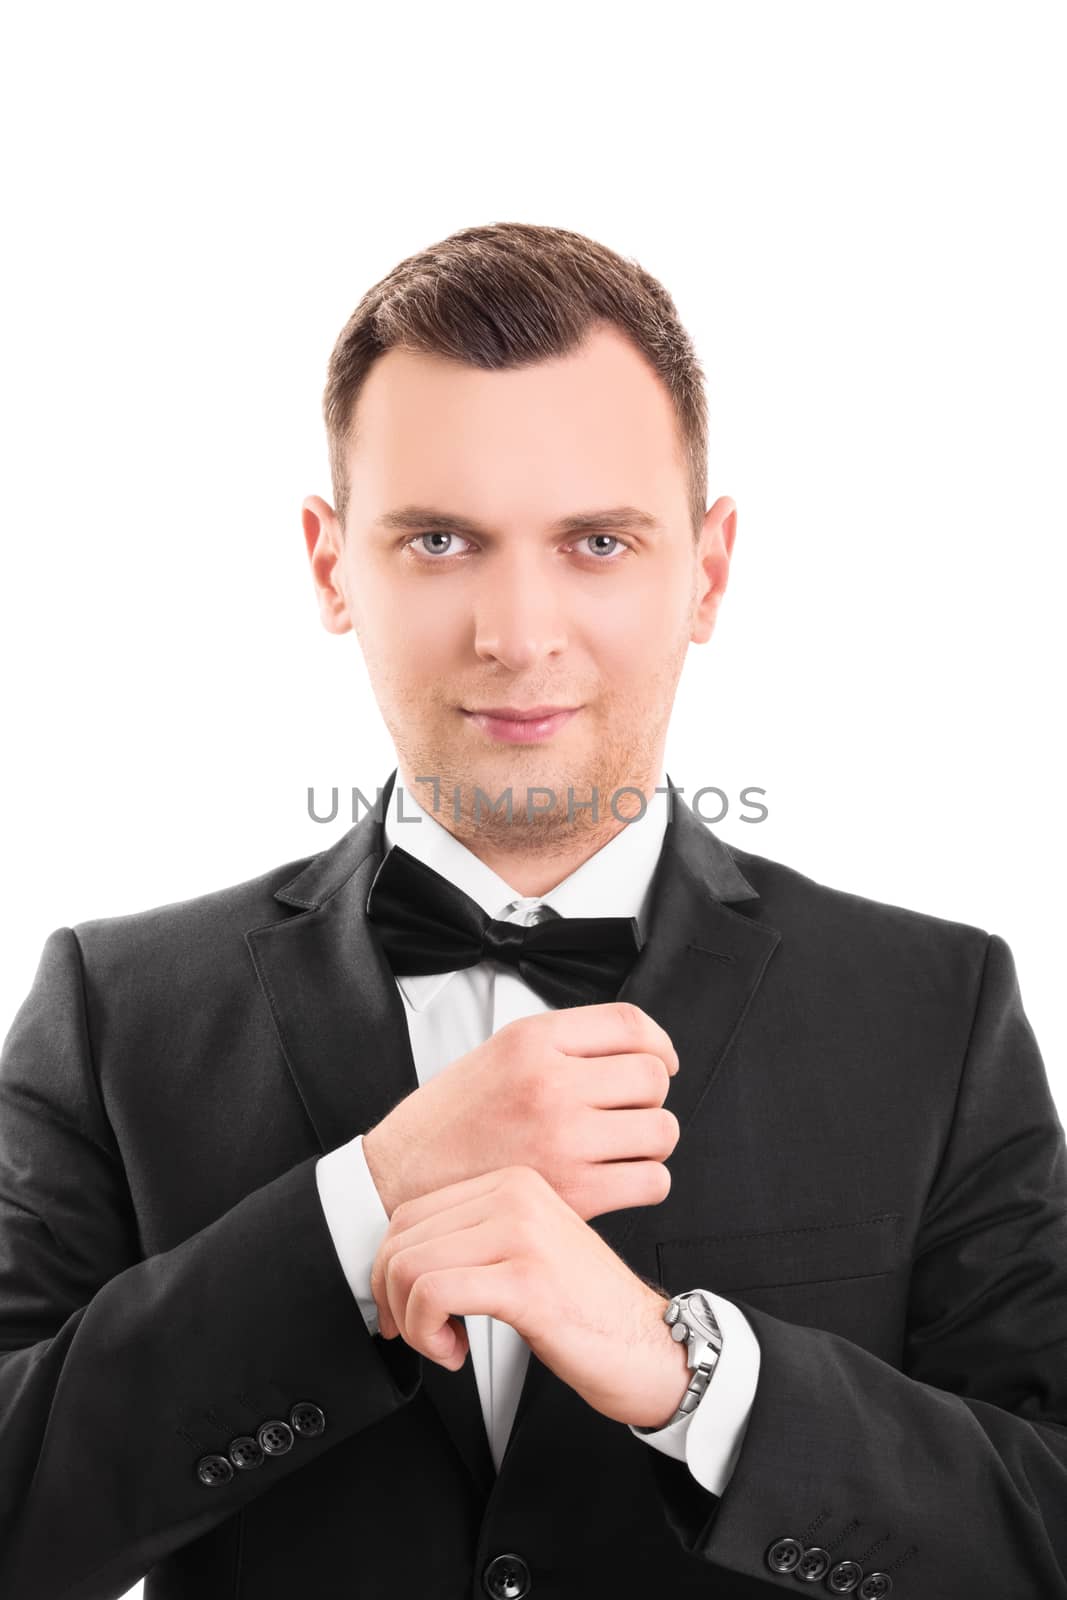 Portrait of a fashionable young man in a suit by Mendelex